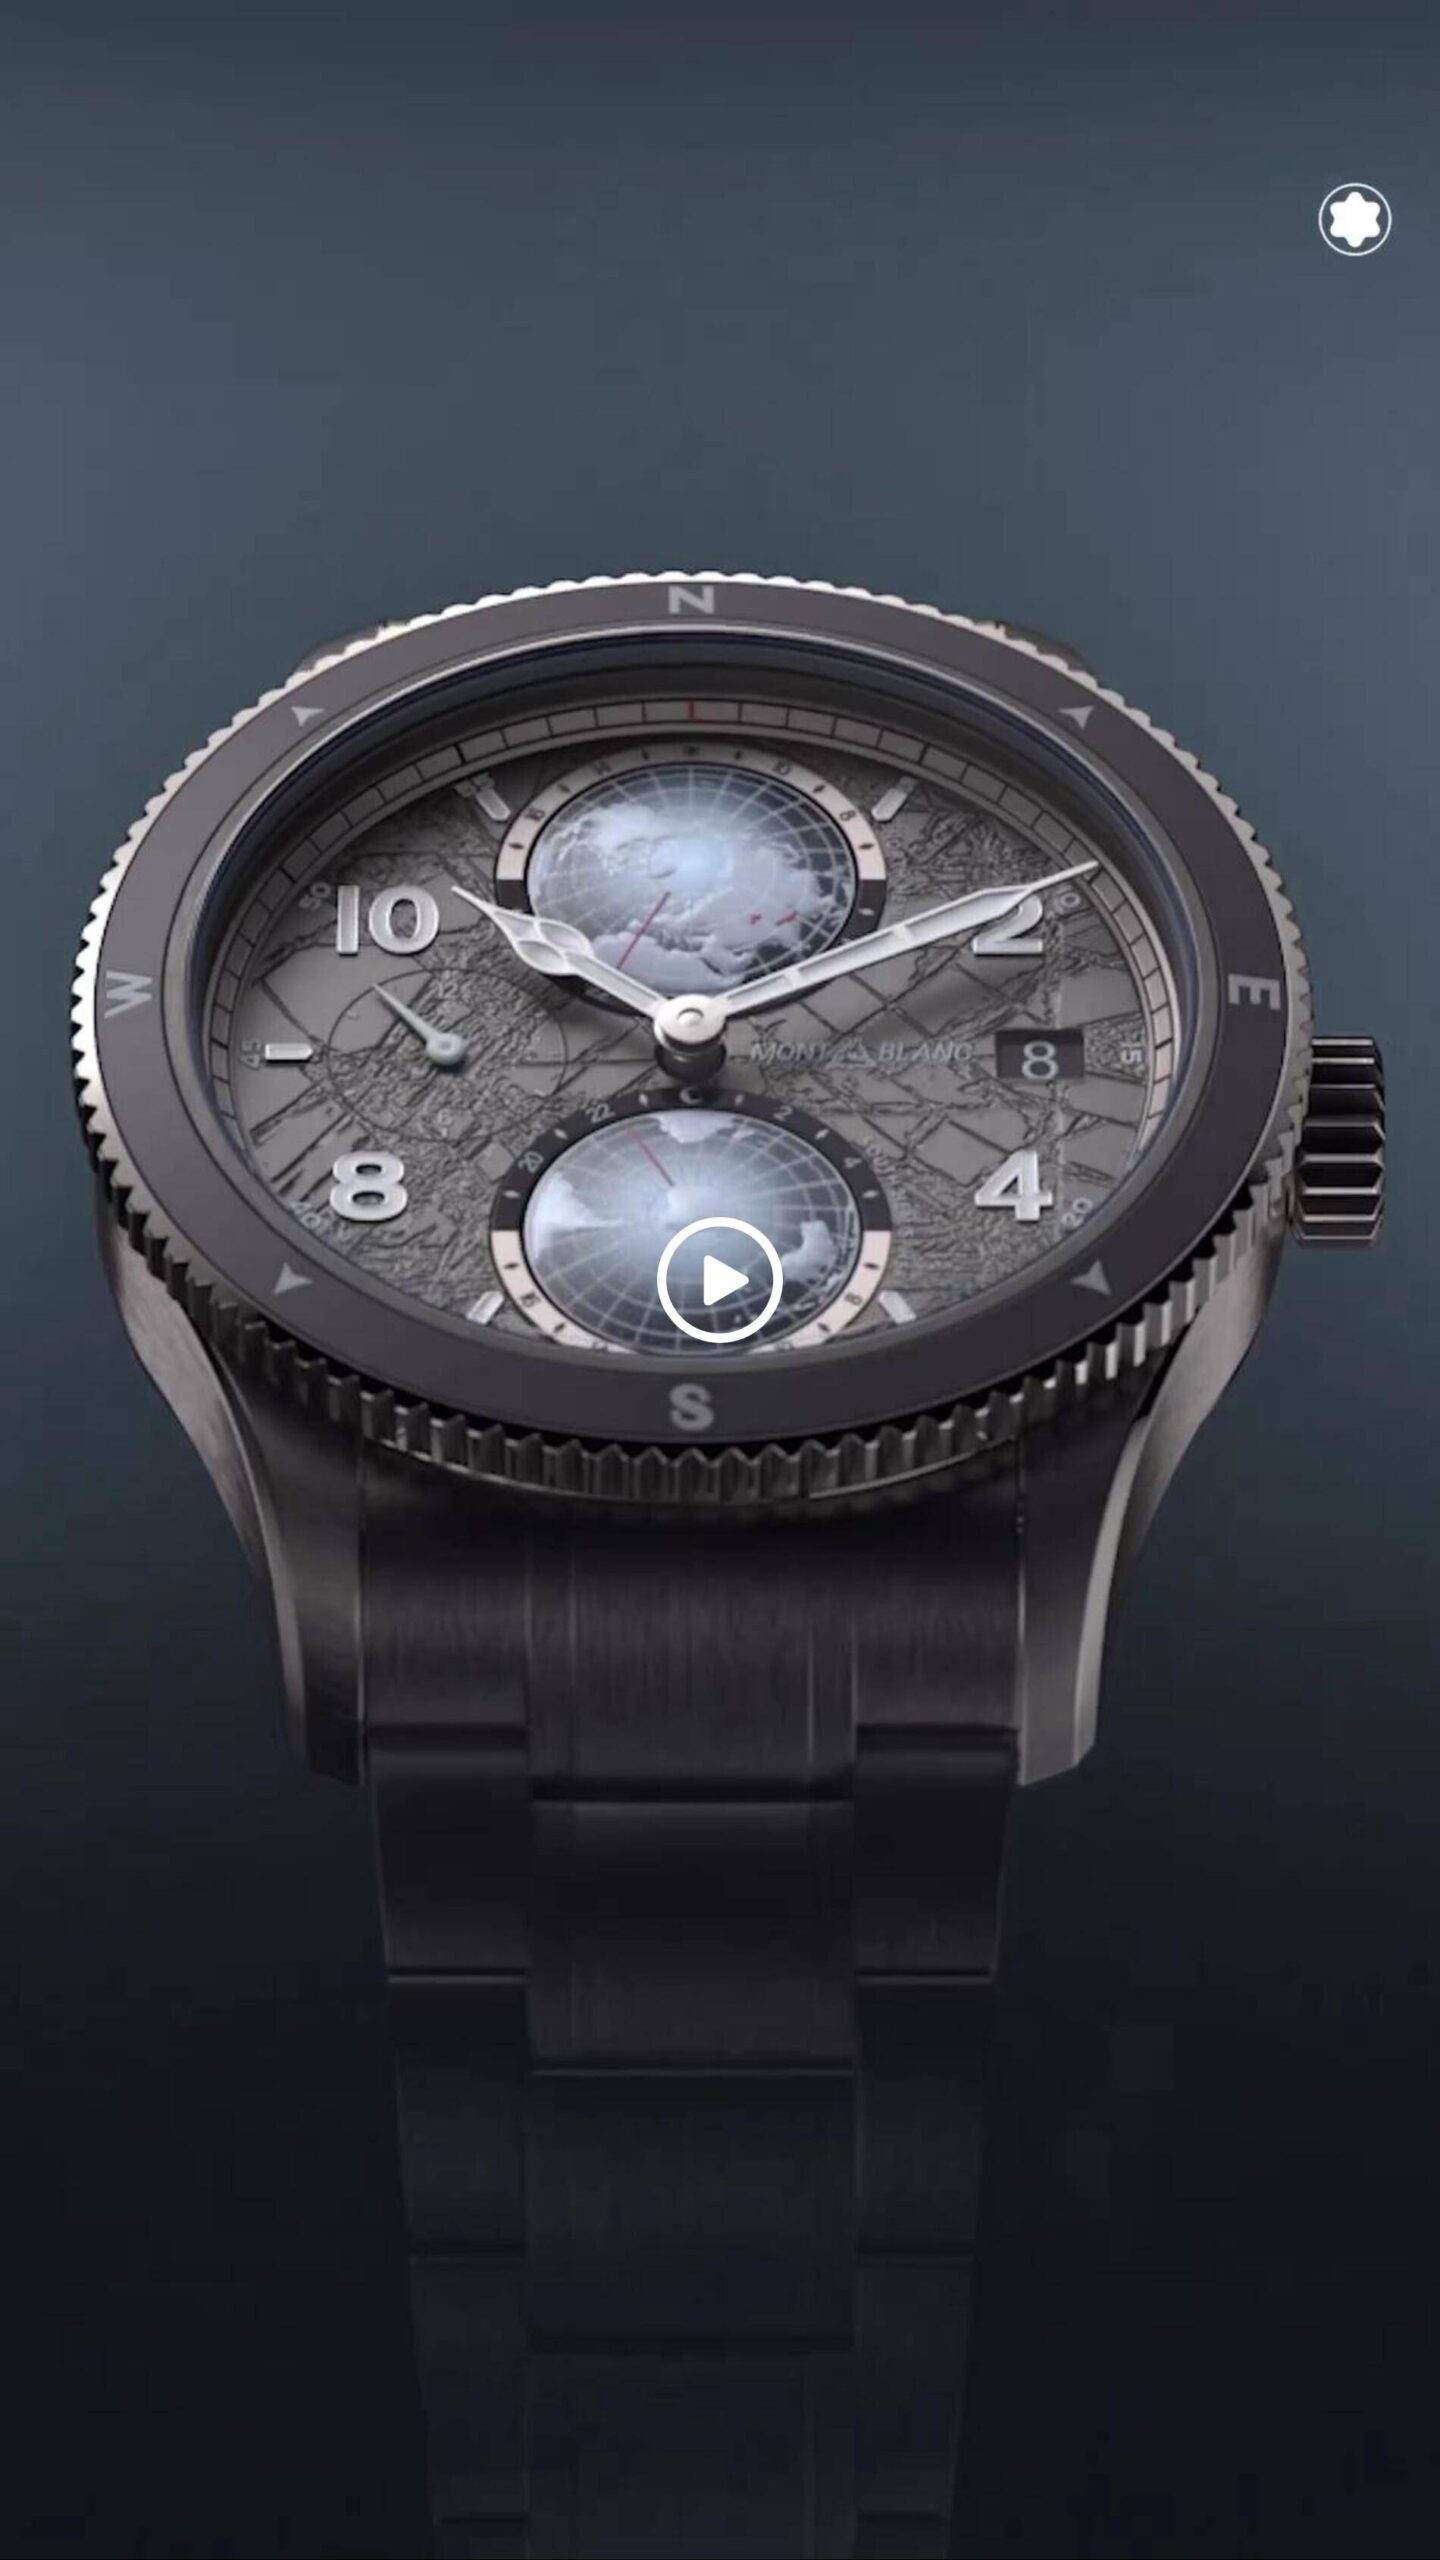 montblanc-1858-geosphere-0-oxygen-the-8000-–-created-to-reach-new-heights-|-senatus-tv